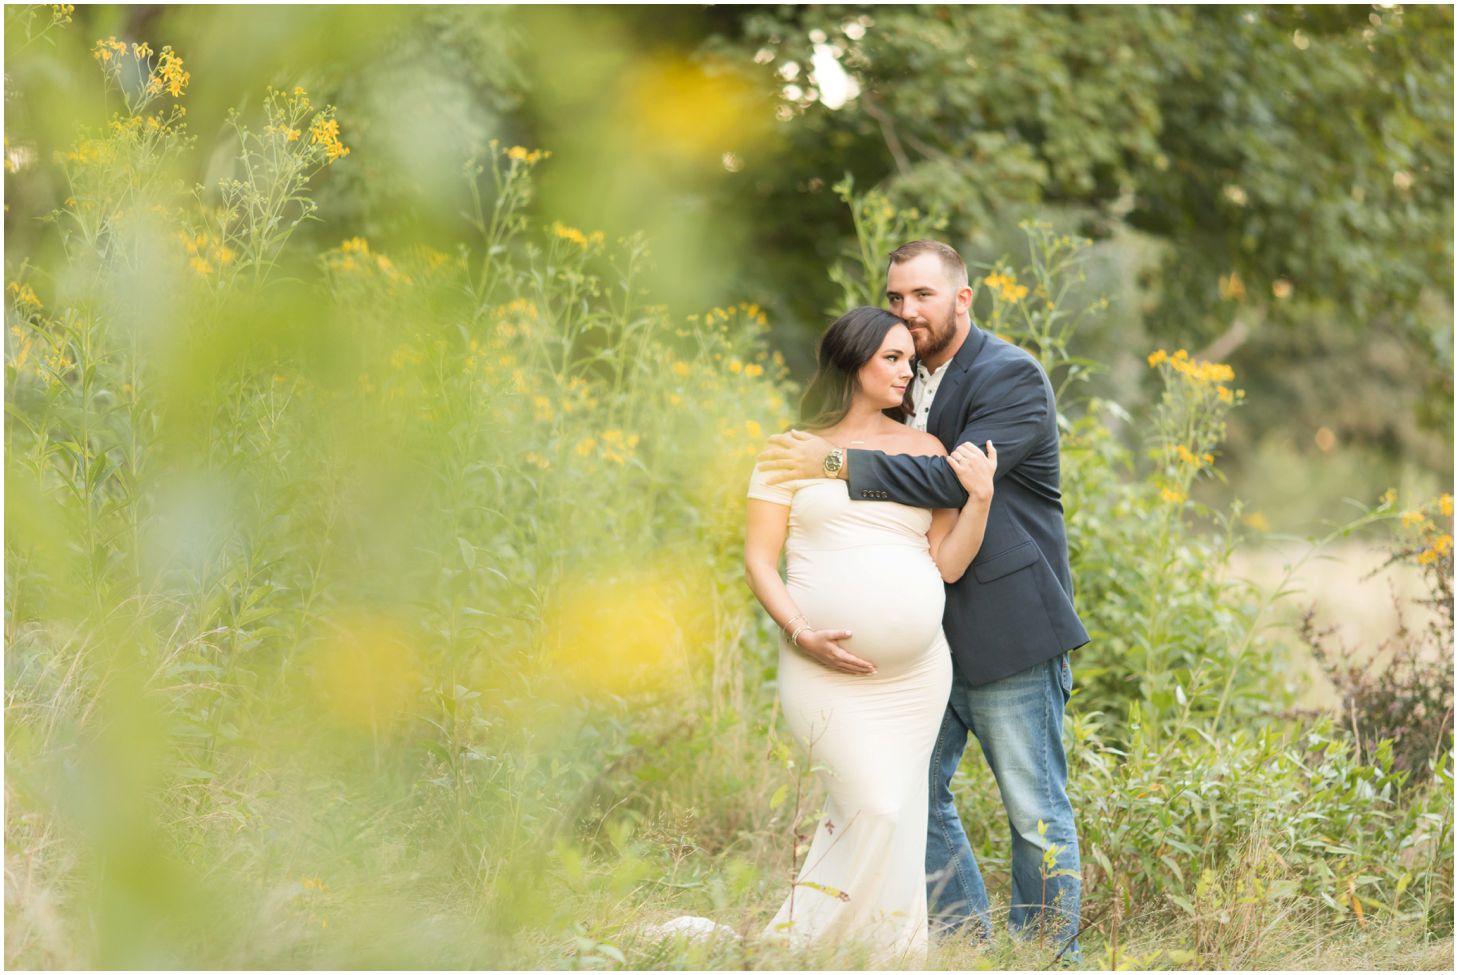 Couple in grassy field at sunset for maternity pictures at North Park in Pittsburgh